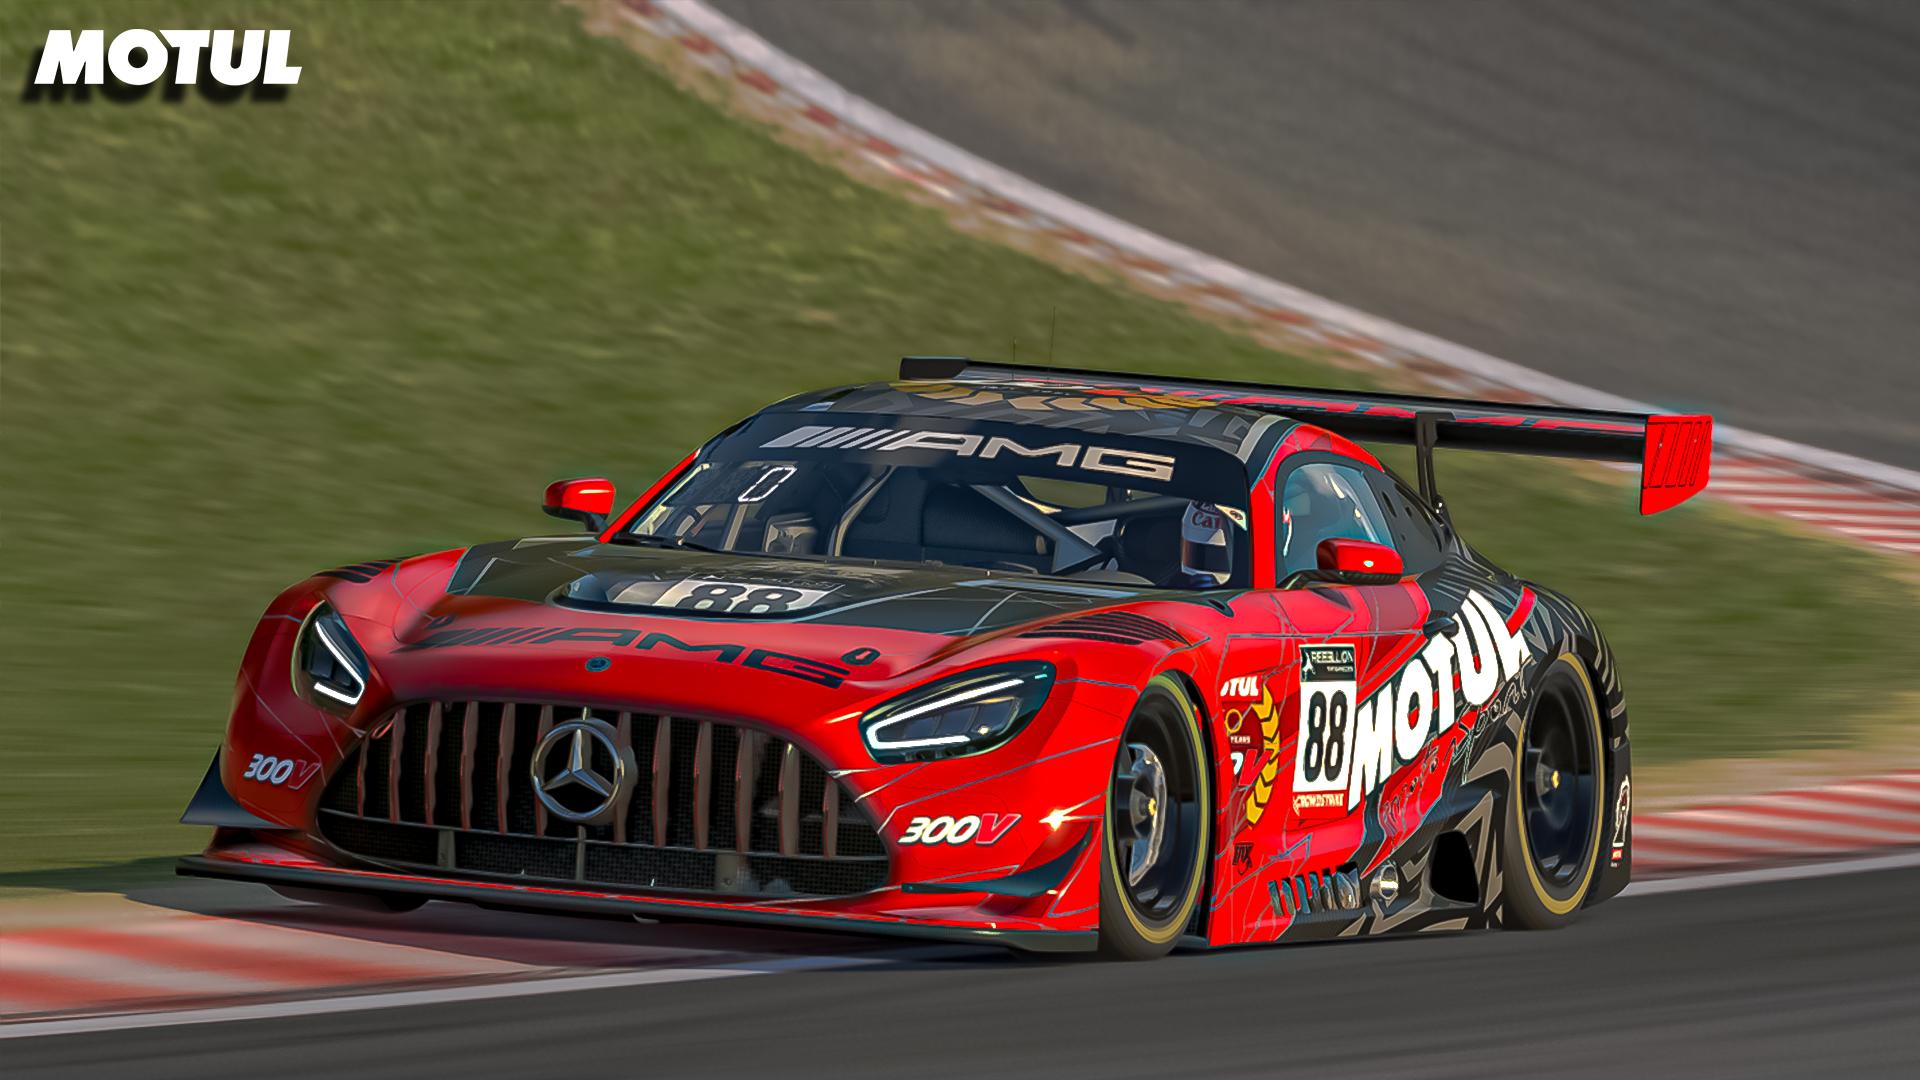 Preview of Motul AMG GT3 by Paul Mansell